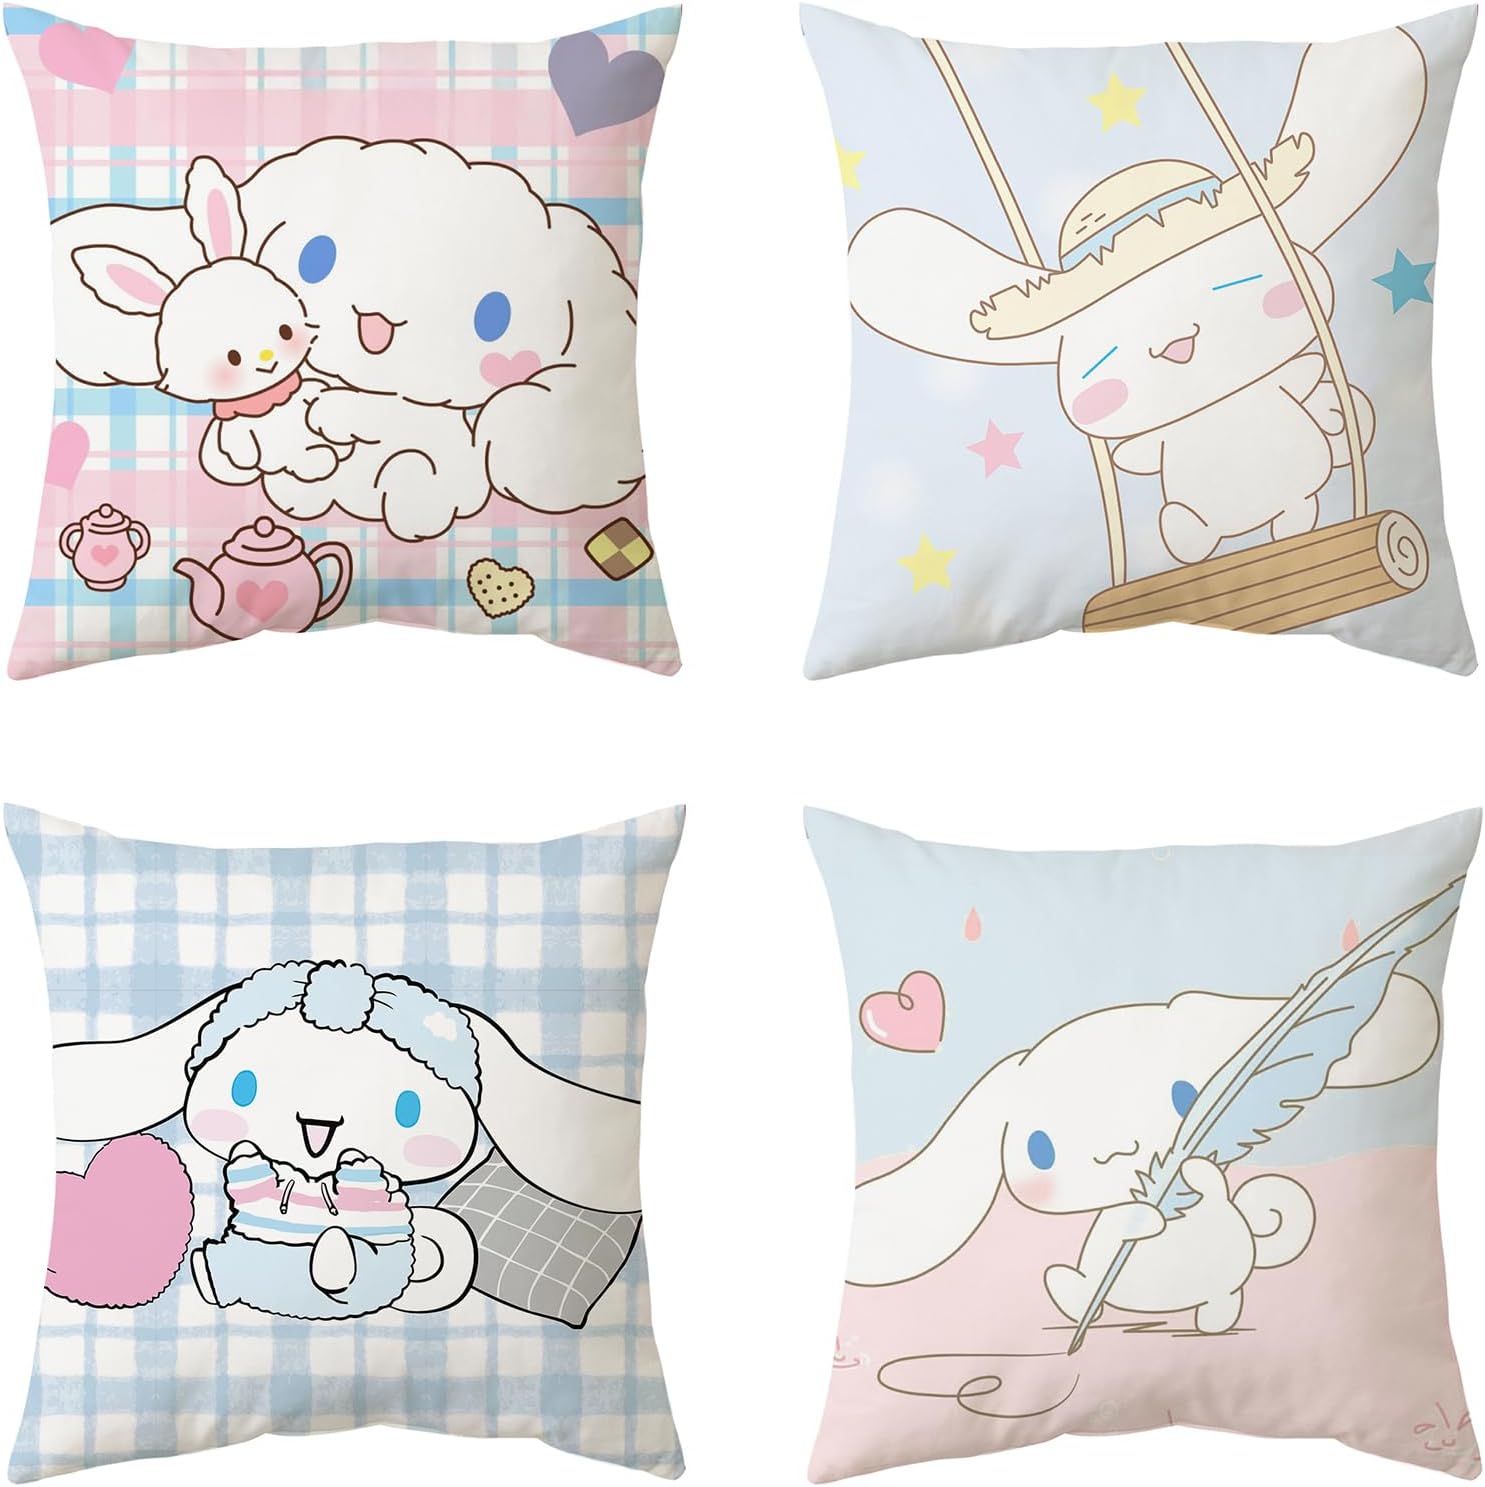 Kawaii Throw Pillow Covers Set of 4, Cute Cartoon Anime Decorative Pillows Covers for Bed and Couch/Sofa, 18x18 Inch Pillow Cases for Bedroom and Living Room (C)